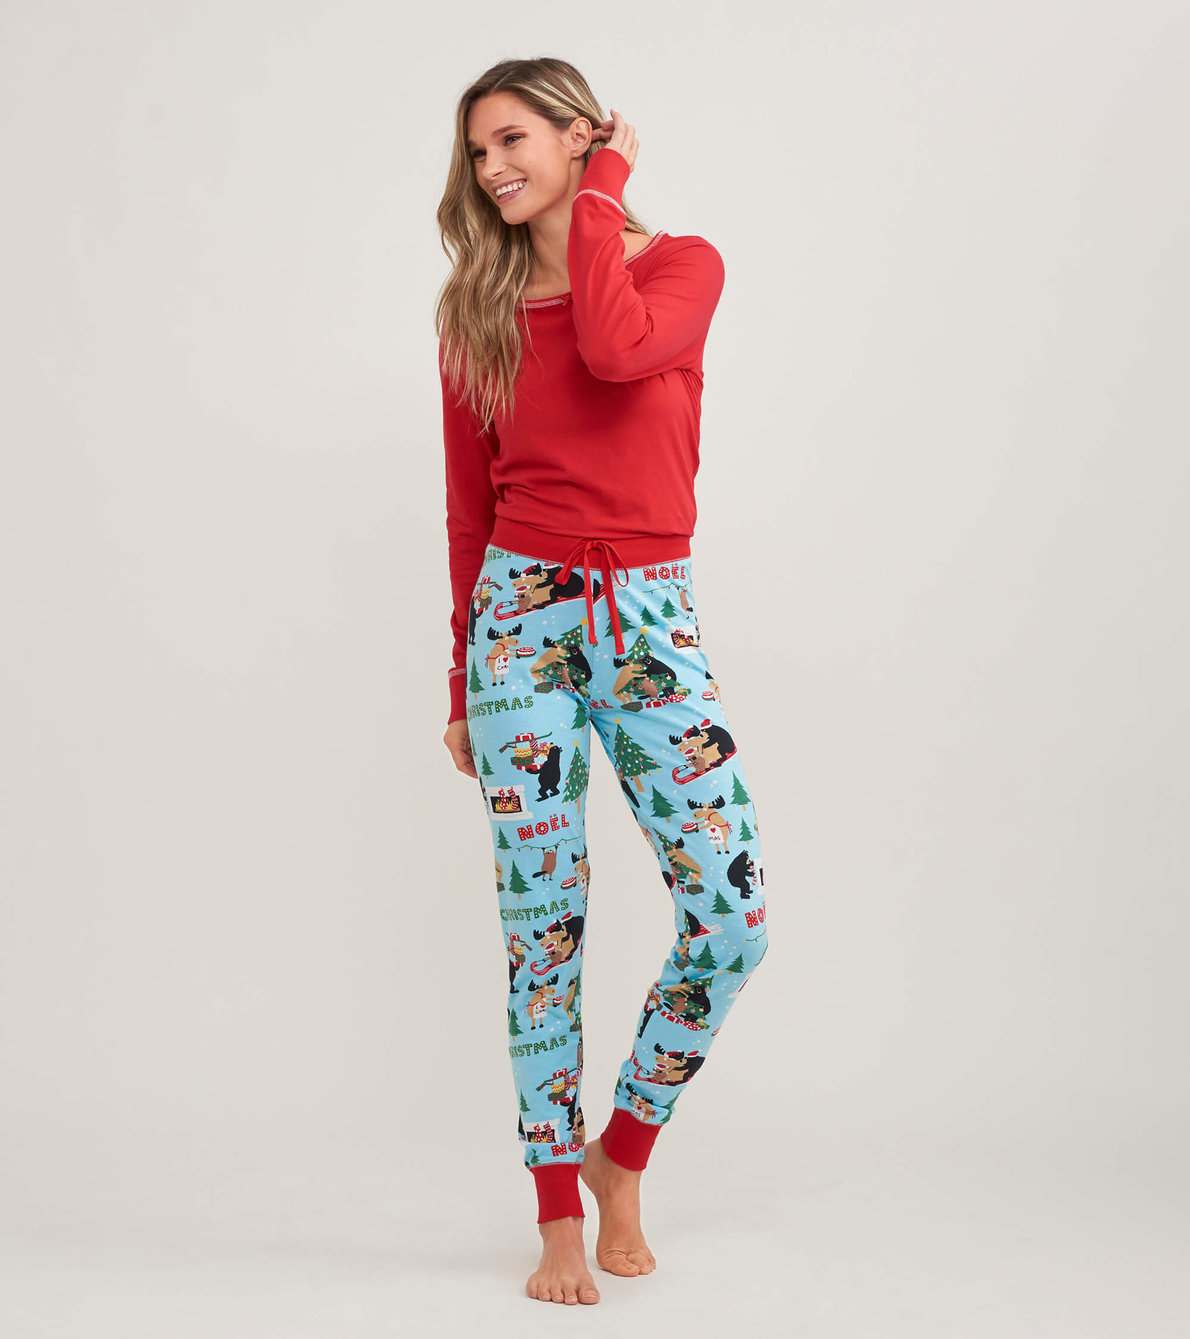 View larger image of Wild About Christmas Women's Long Sleeve Tee and Leggings Pajama Separates